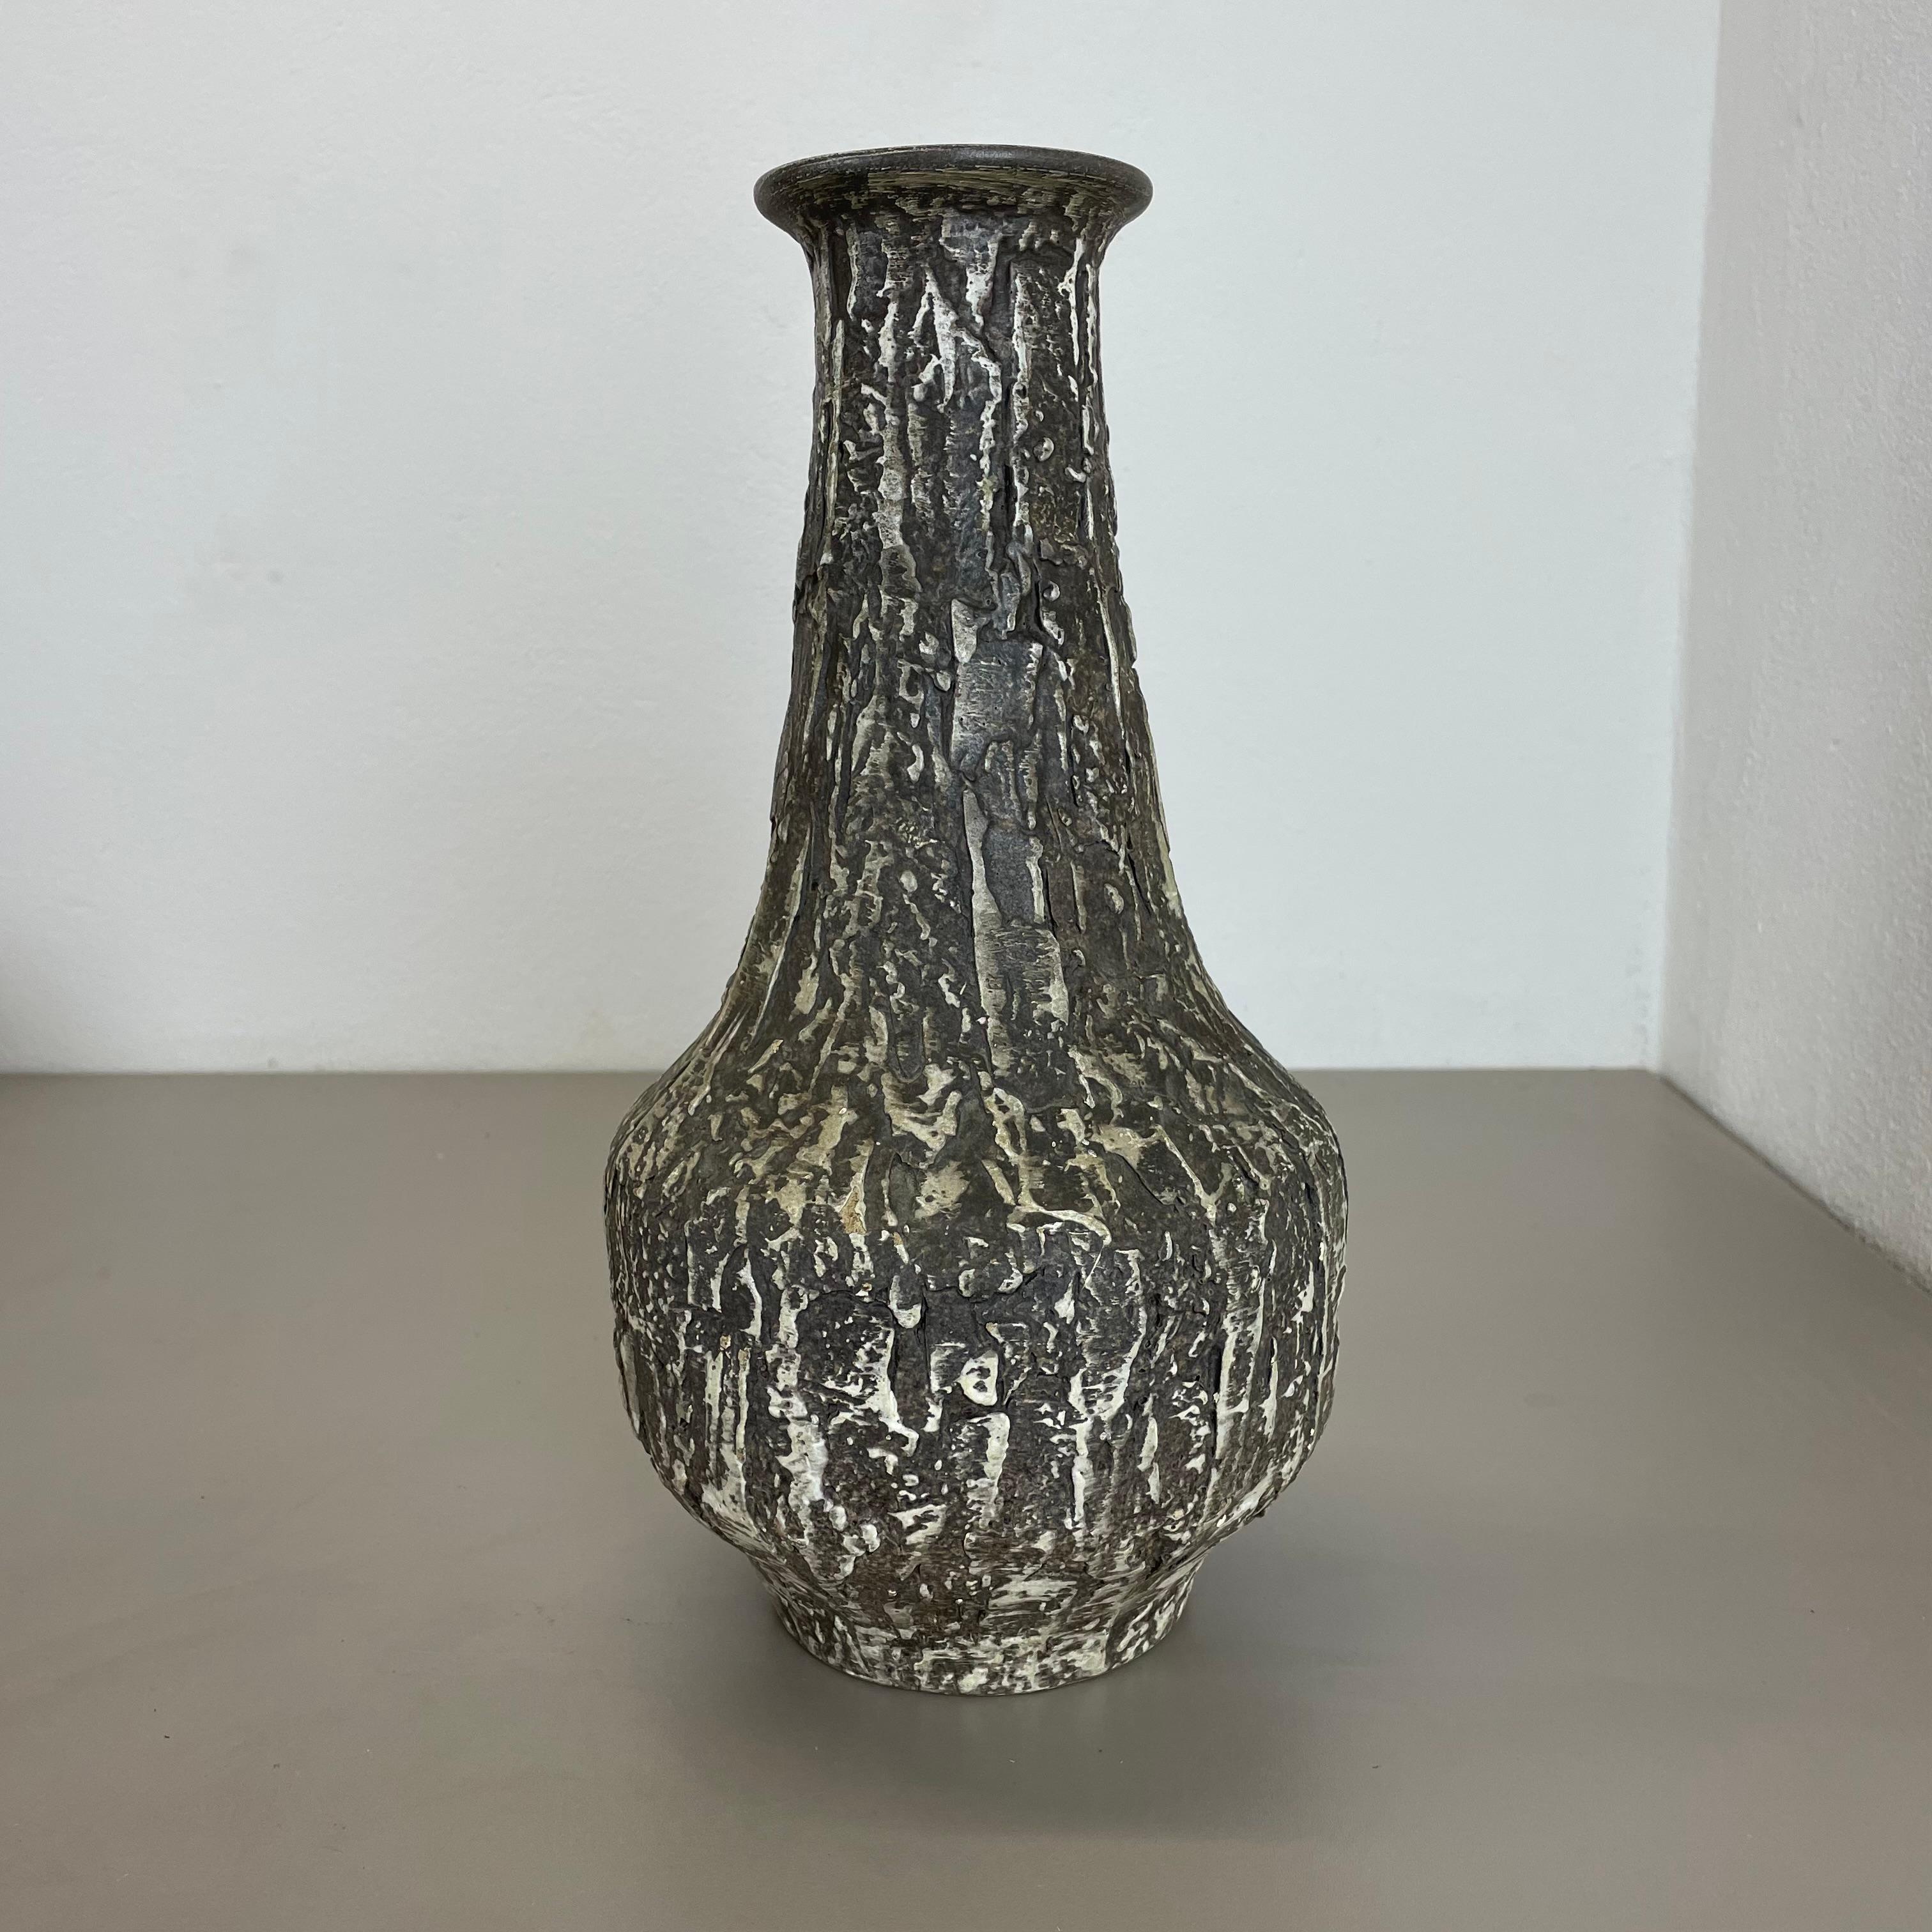 Article:

Pottery ceramic vase 


Producer:

ILKRA Ceramics, Germany


Decade:

1970s





Original vintage 1970s pottery ceramic vase made in Germany. High quality German production with a nice abstract brutalist surface glaze. The vase was